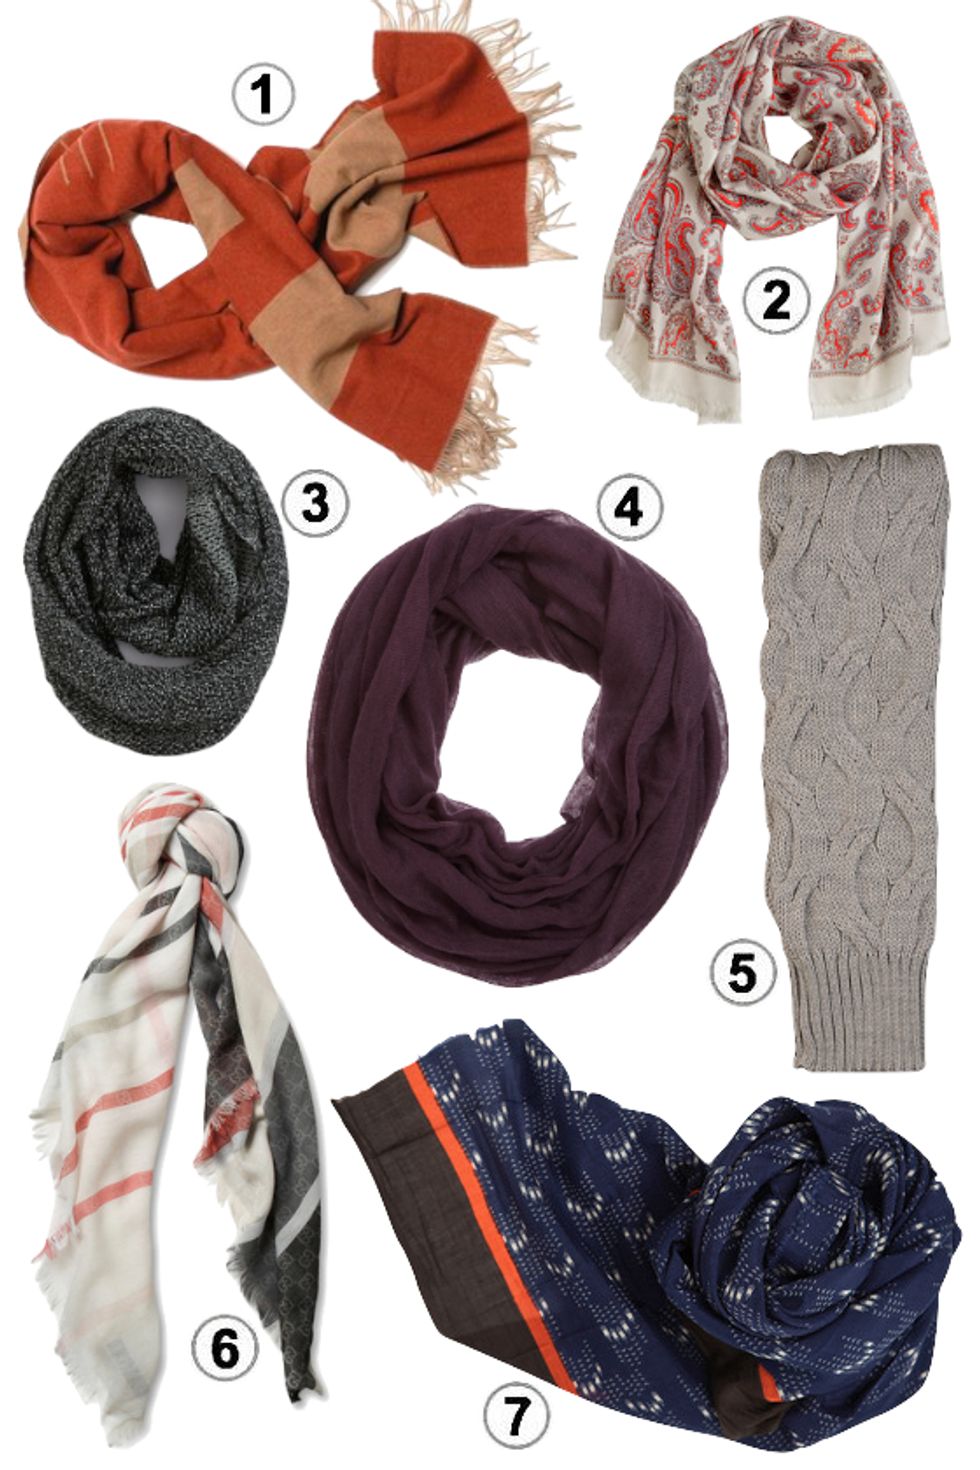 Look of the Week: Unisex Scarves for Every Occasion